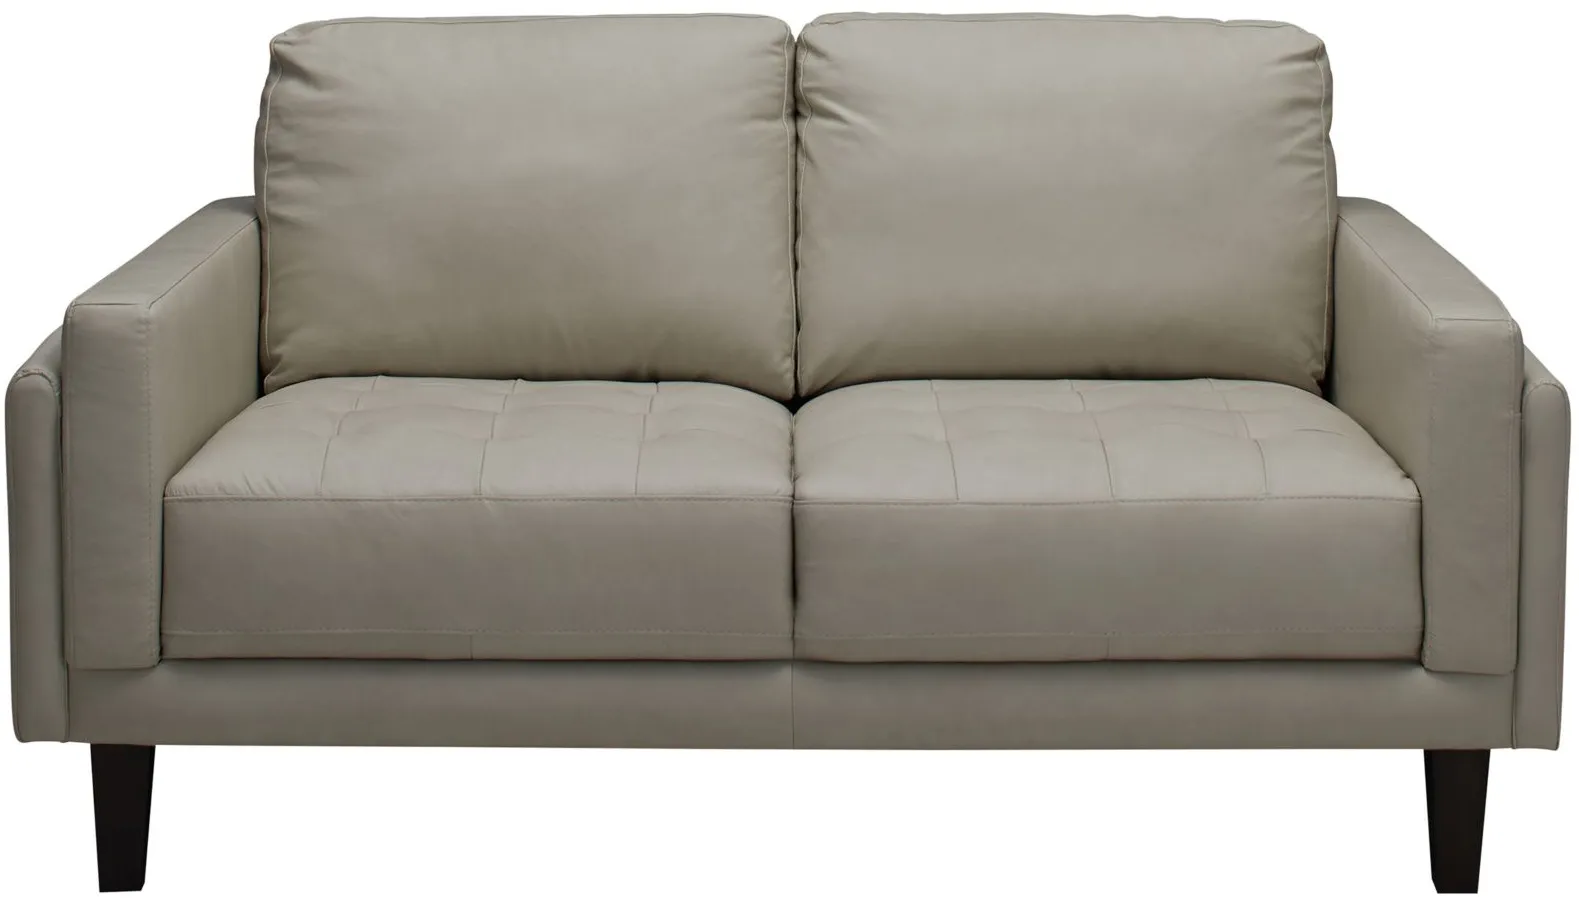 Hunter Loveseat in Ivory by Chateau D'Ax